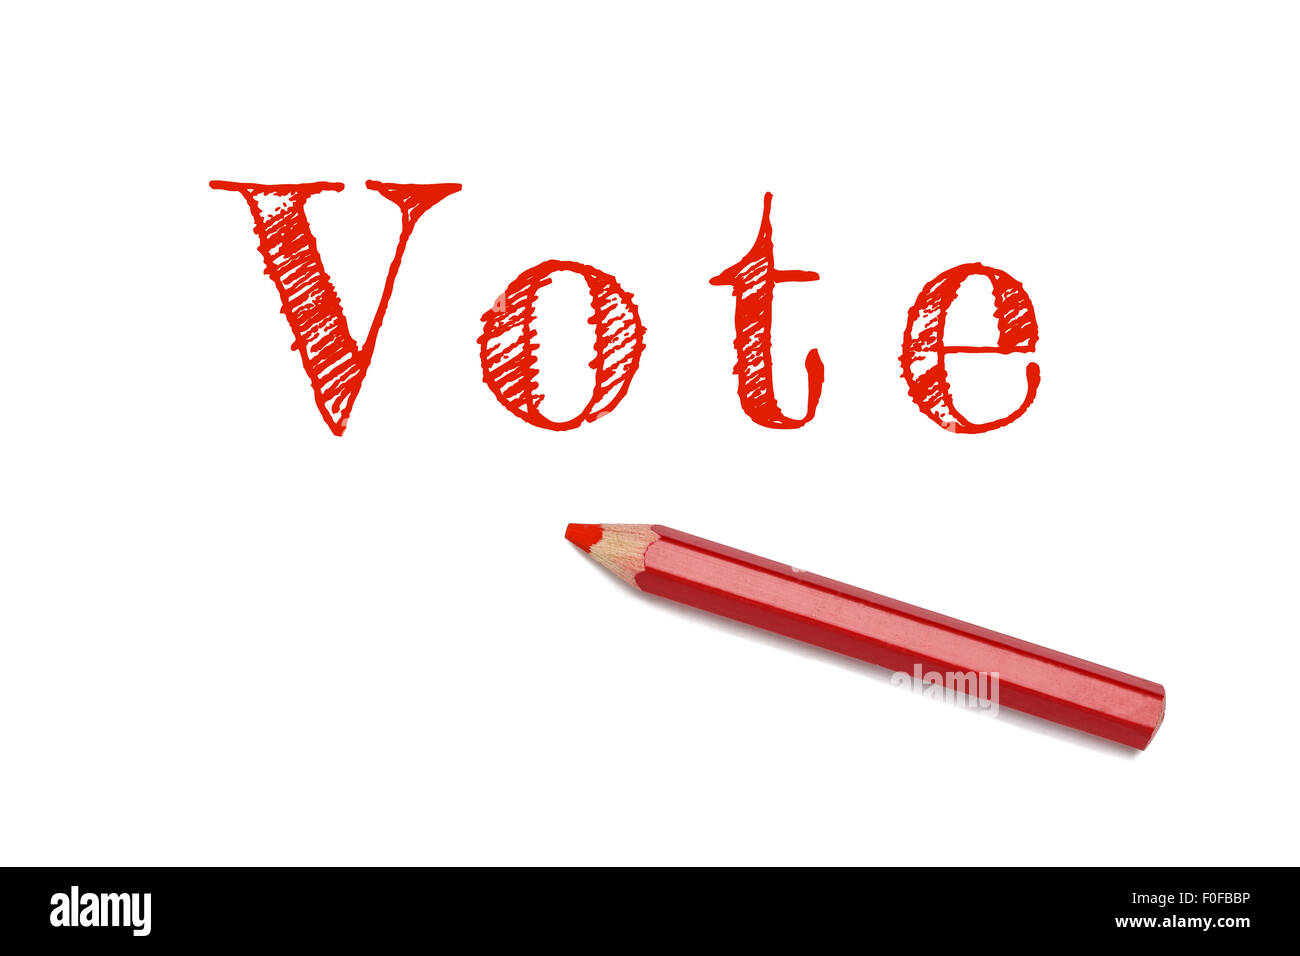 Hand Draw Sketch Vote Box Stock Photo Picture And Royalty Free Image  Image 38927284